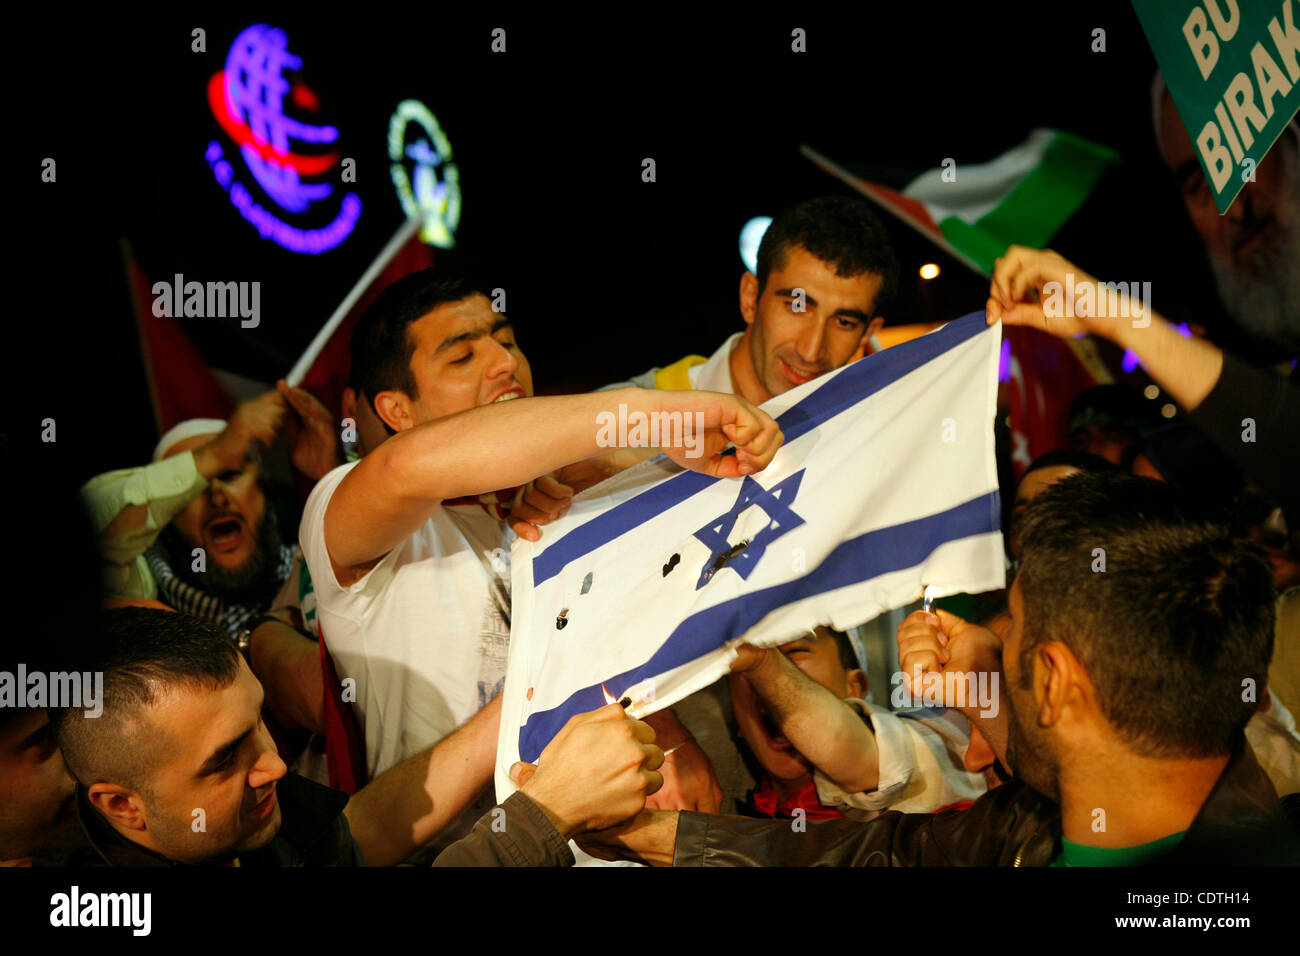 Jun 03 2010 - Istanbul, Turkey. Demonstrators try to burn a Israel flag at the Ataturk Airport as they wait activists expelled from Israel. (Credit Image: © Sezayi Erken/ZUMA Press) Stock Photo